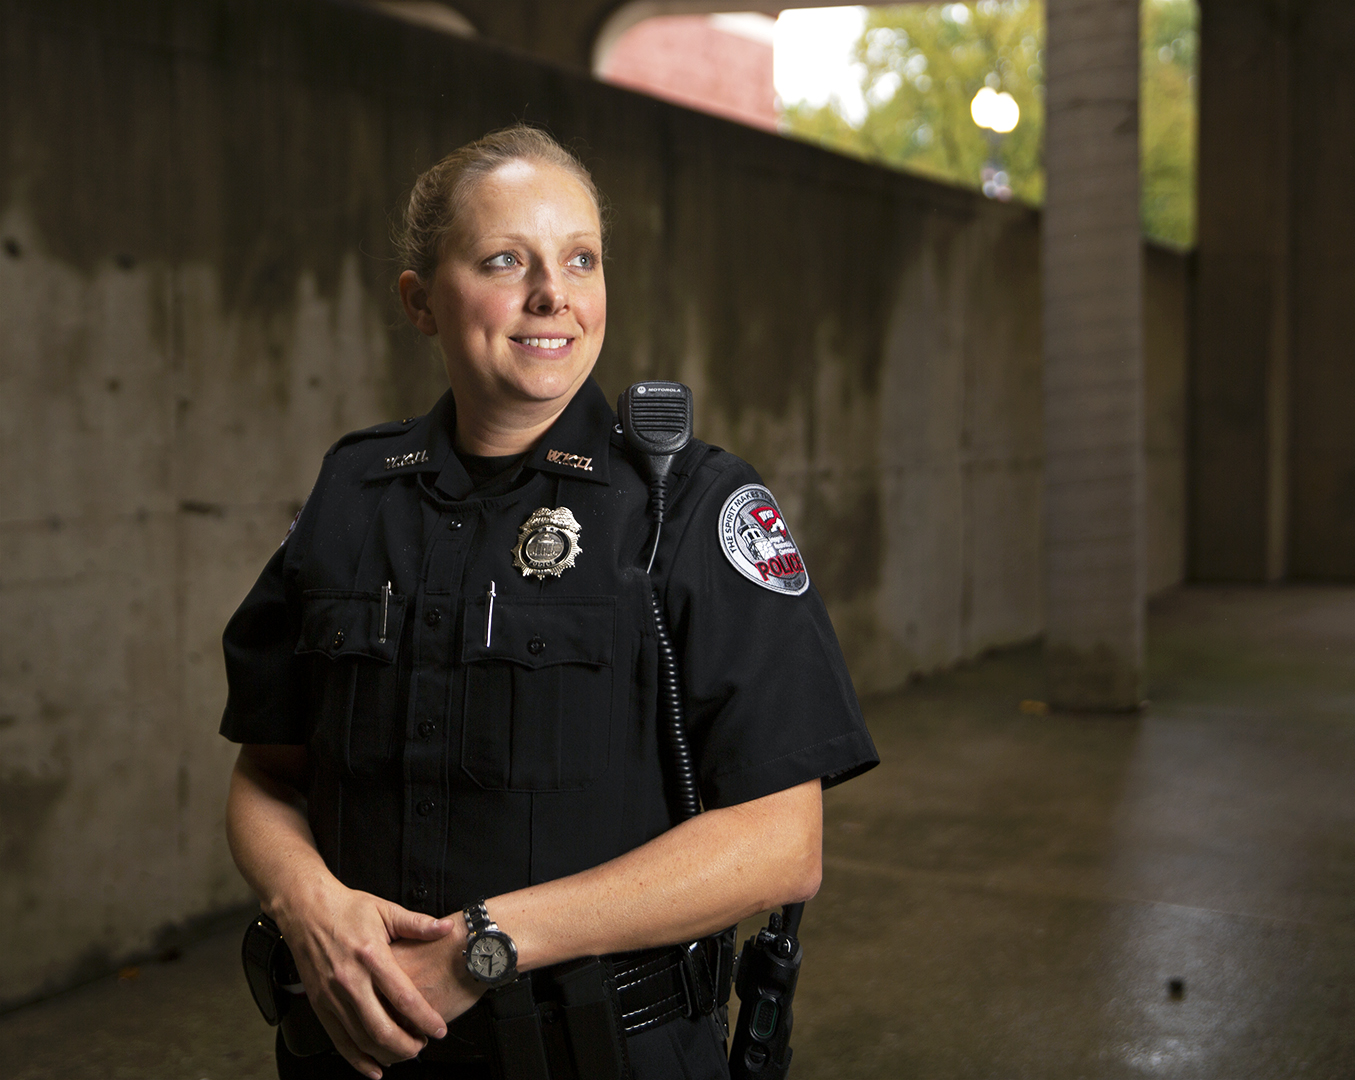 Melissa+Bailey+was+hired+by+WKU+Police+in+October+of+2018+and+her+first+day+in+uniform+was+Oct.+15.